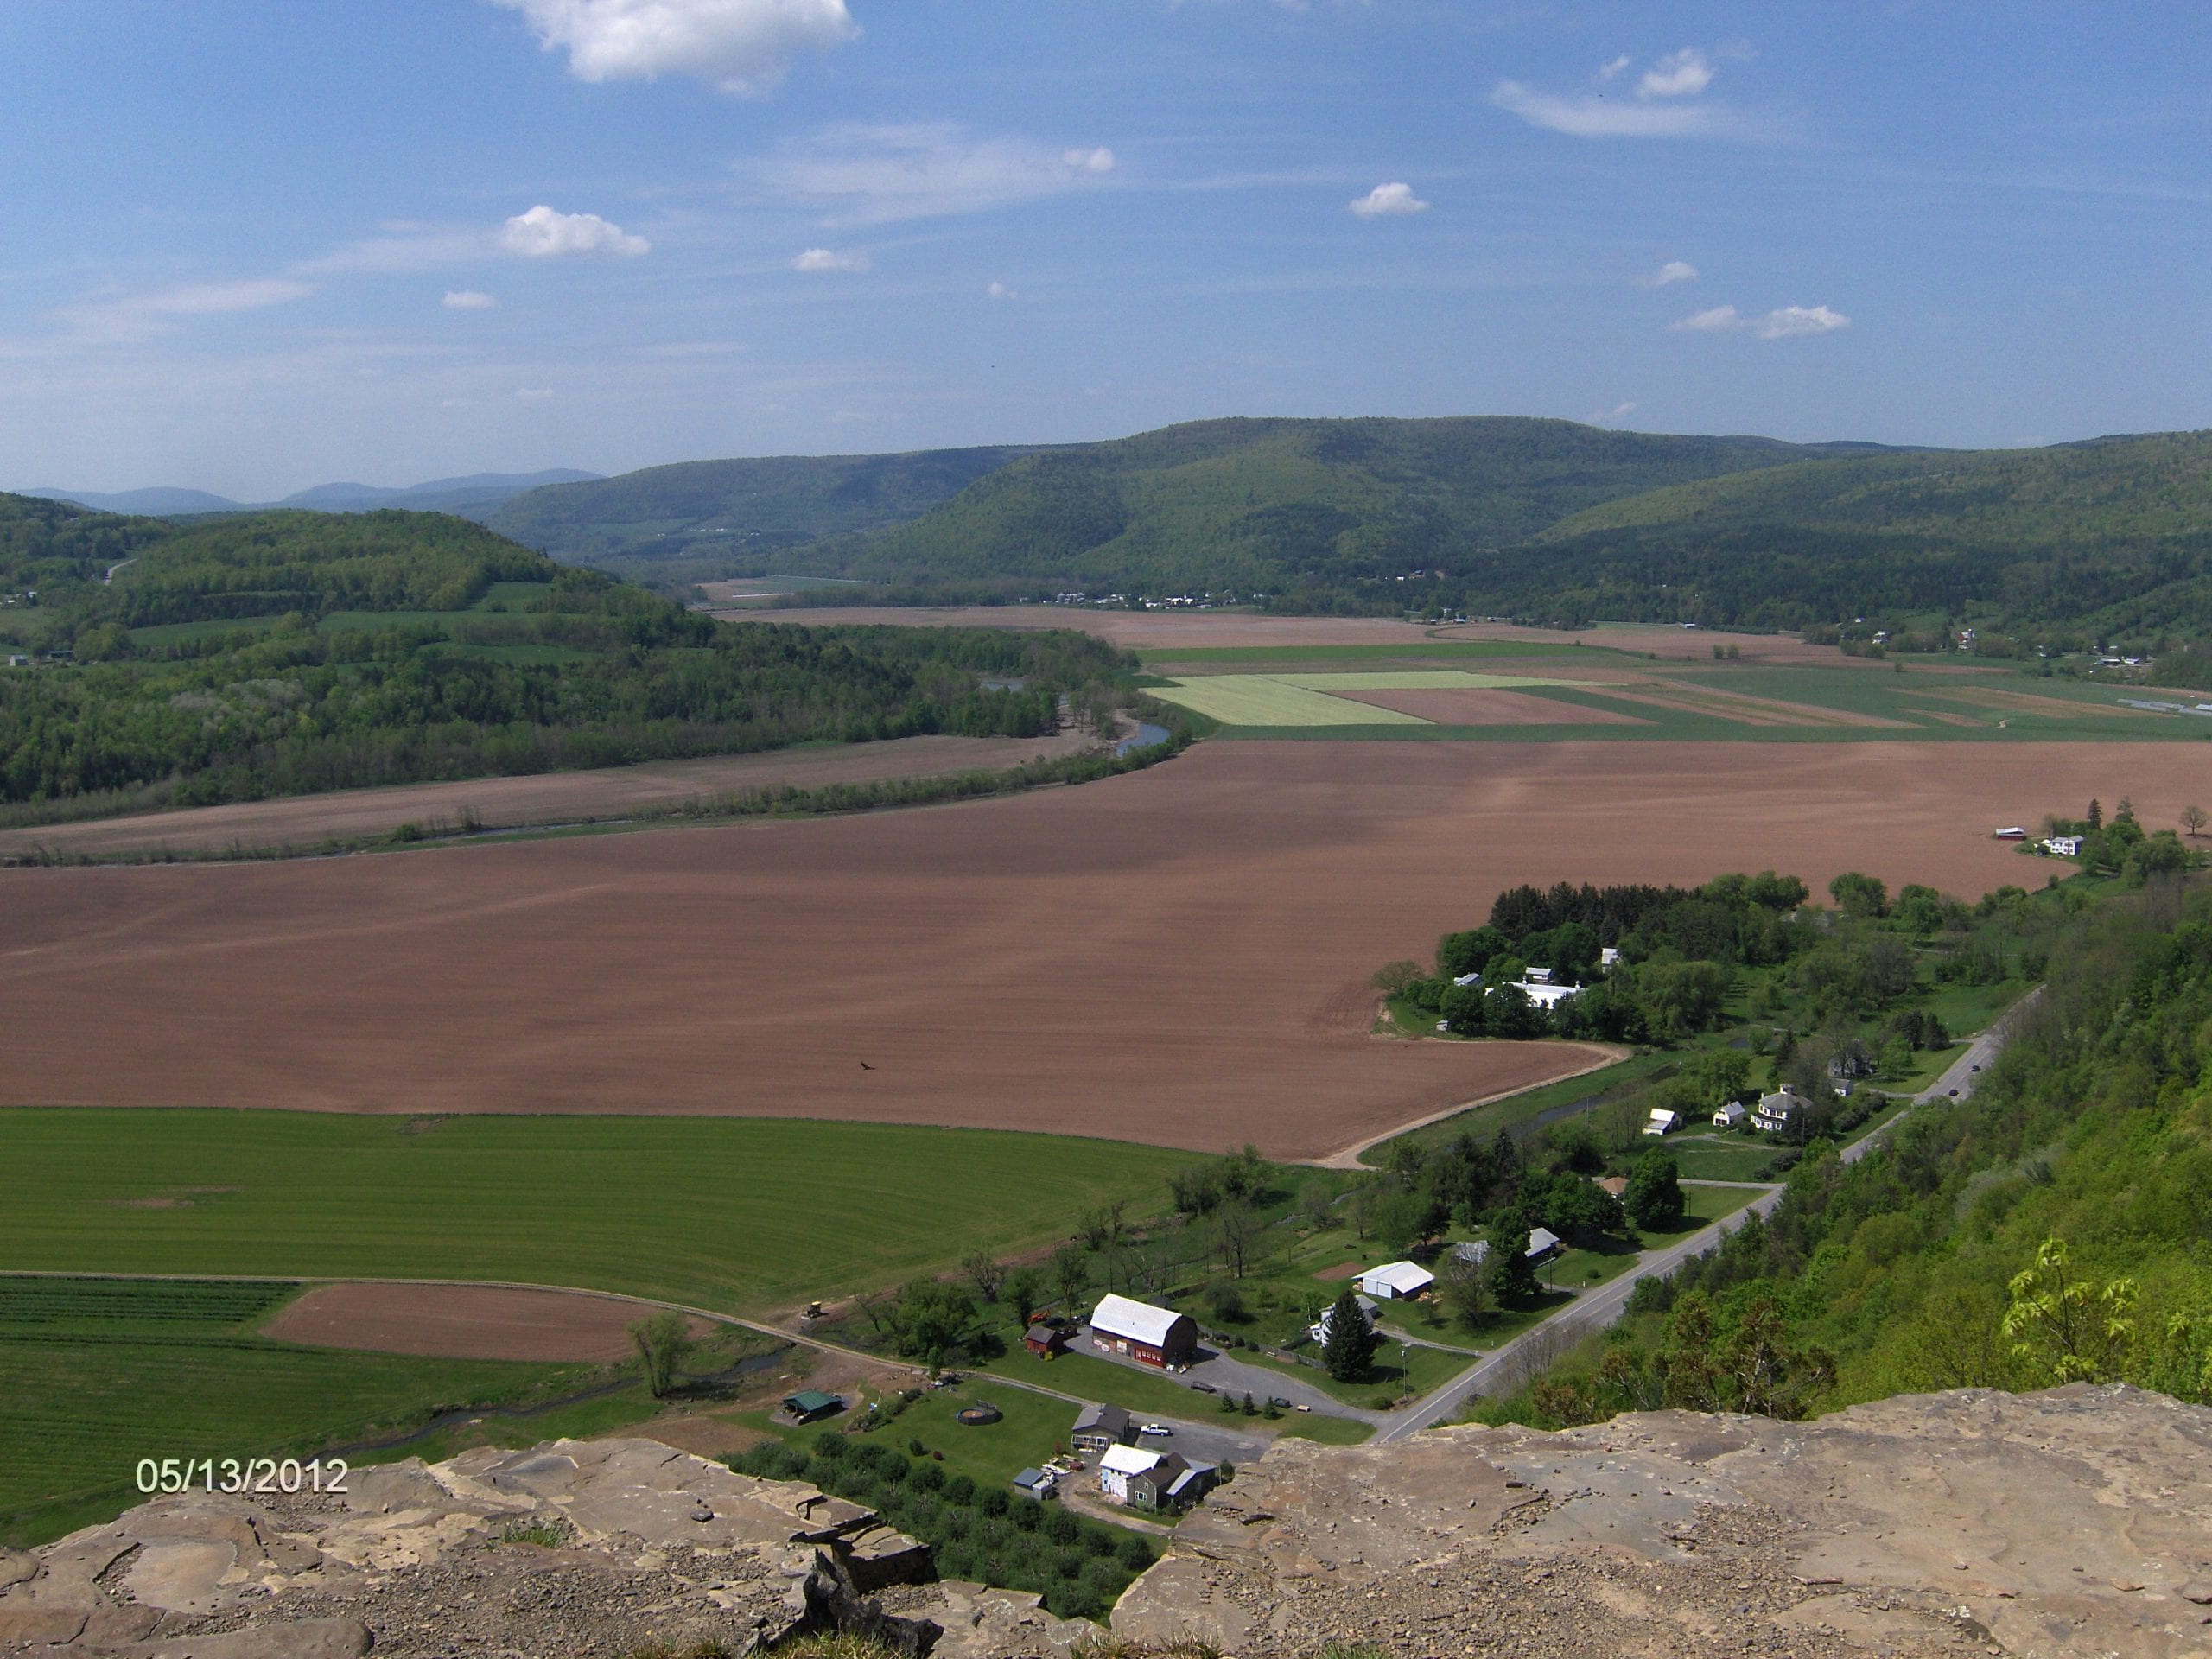 photograph of Vroman's Nose, a mountain, in the distance beyond a farmed field